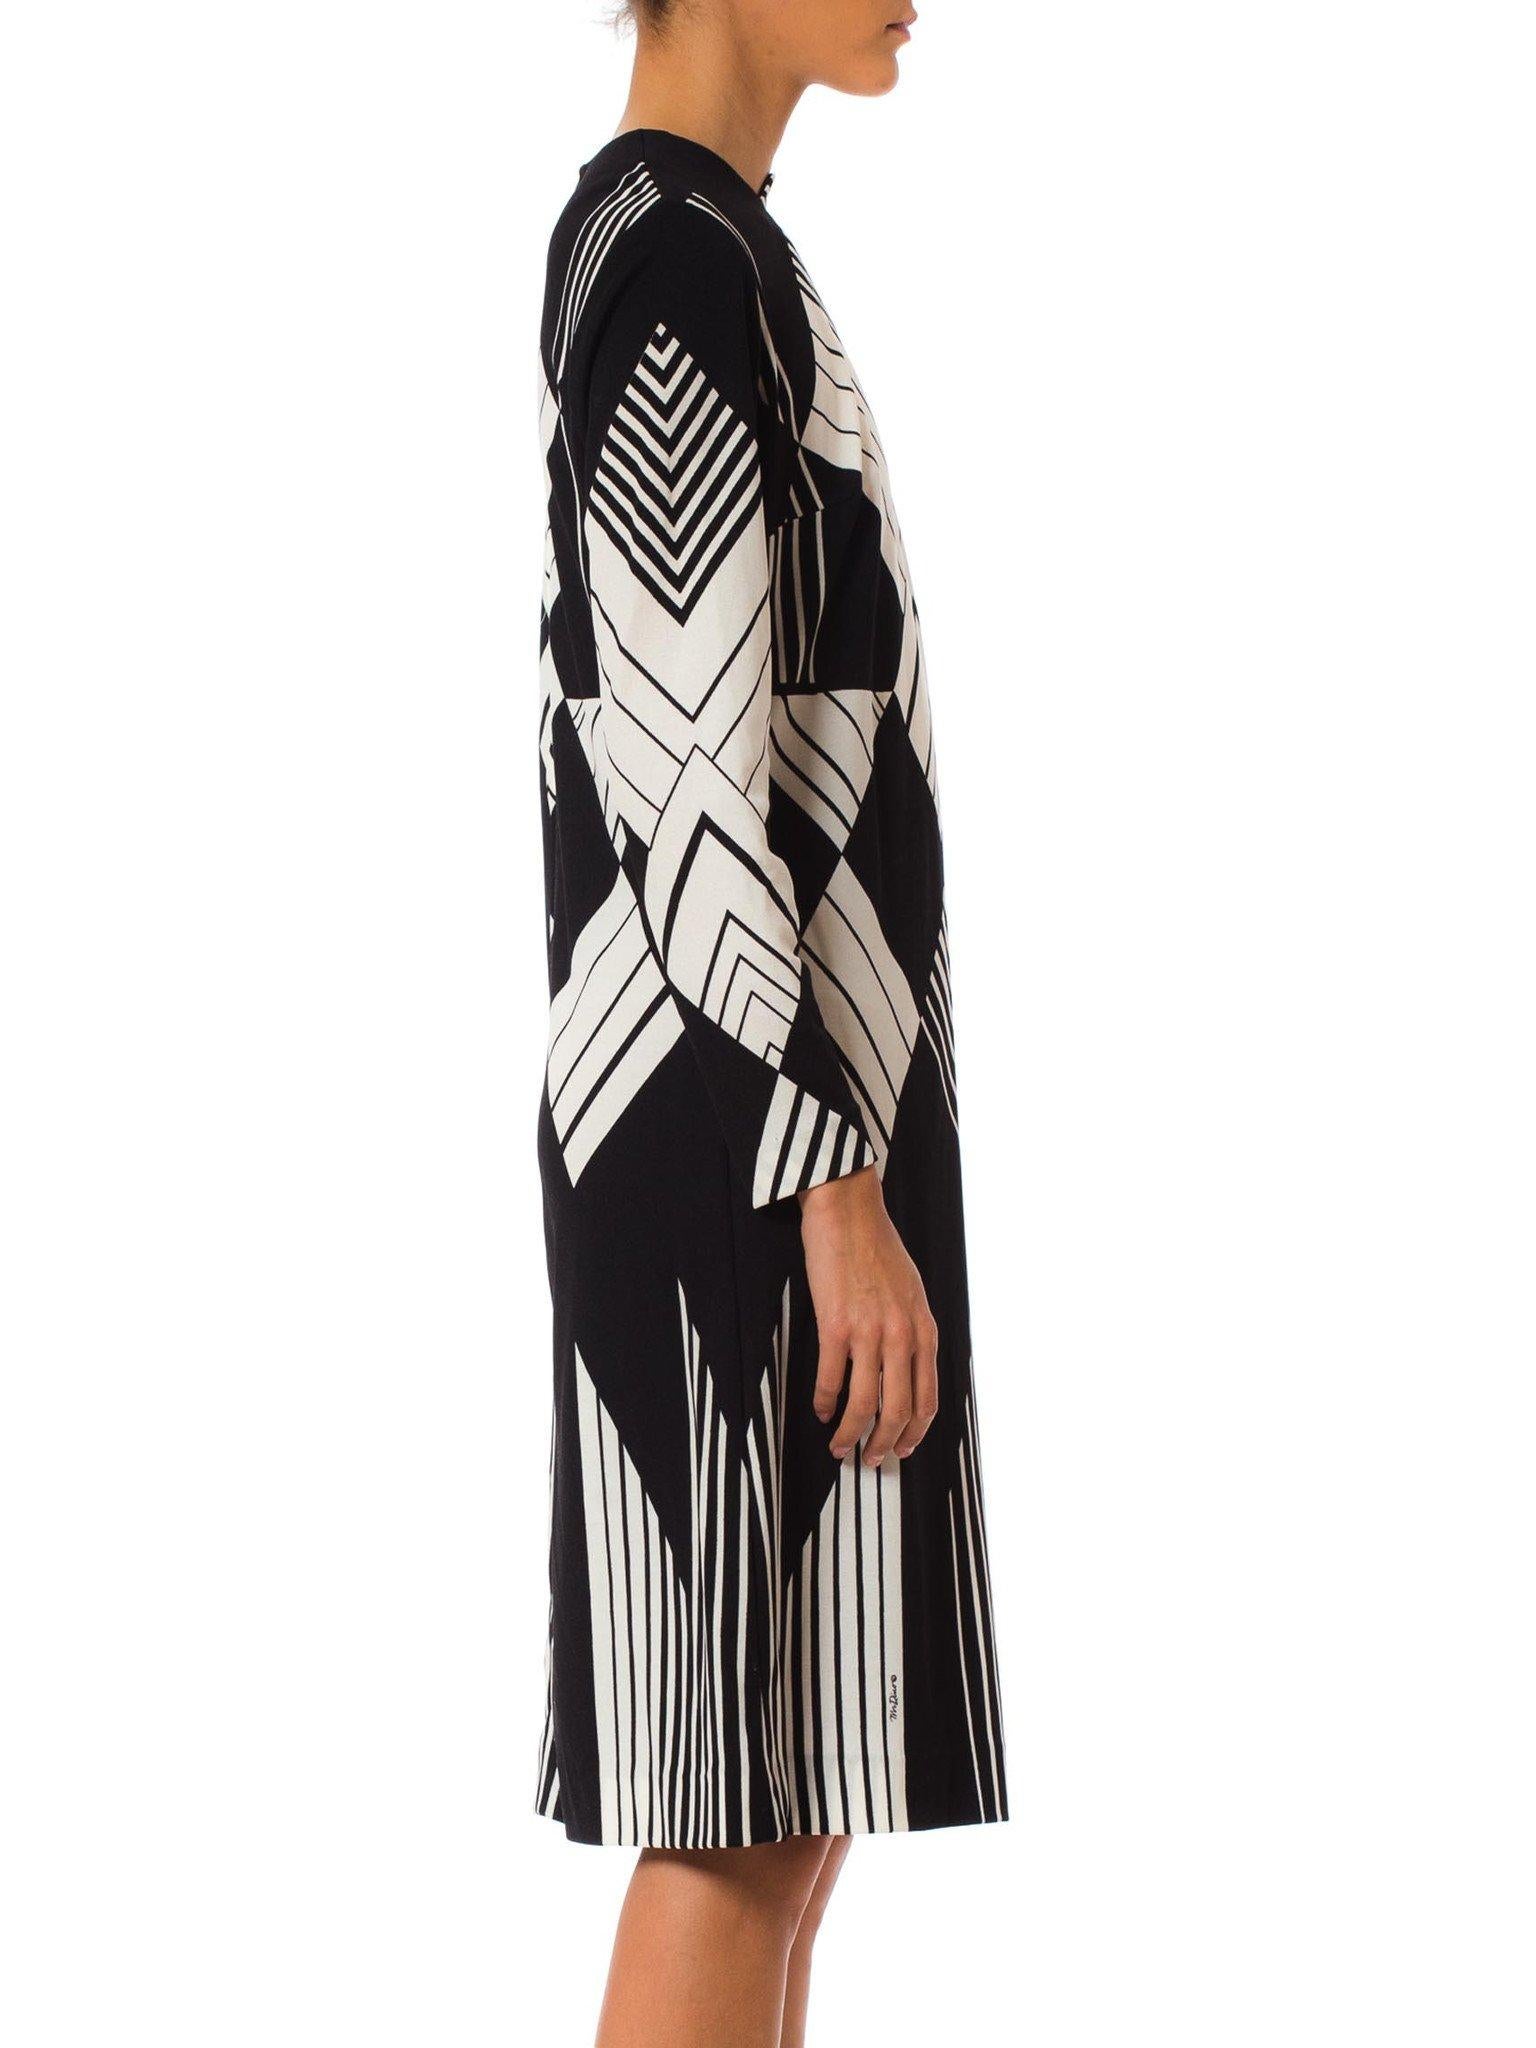 1960S MR DINO Style Black & White Polyester Jersey Op-Art Mod Geometric Long Sl In Excellent Condition For Sale In New York, NY